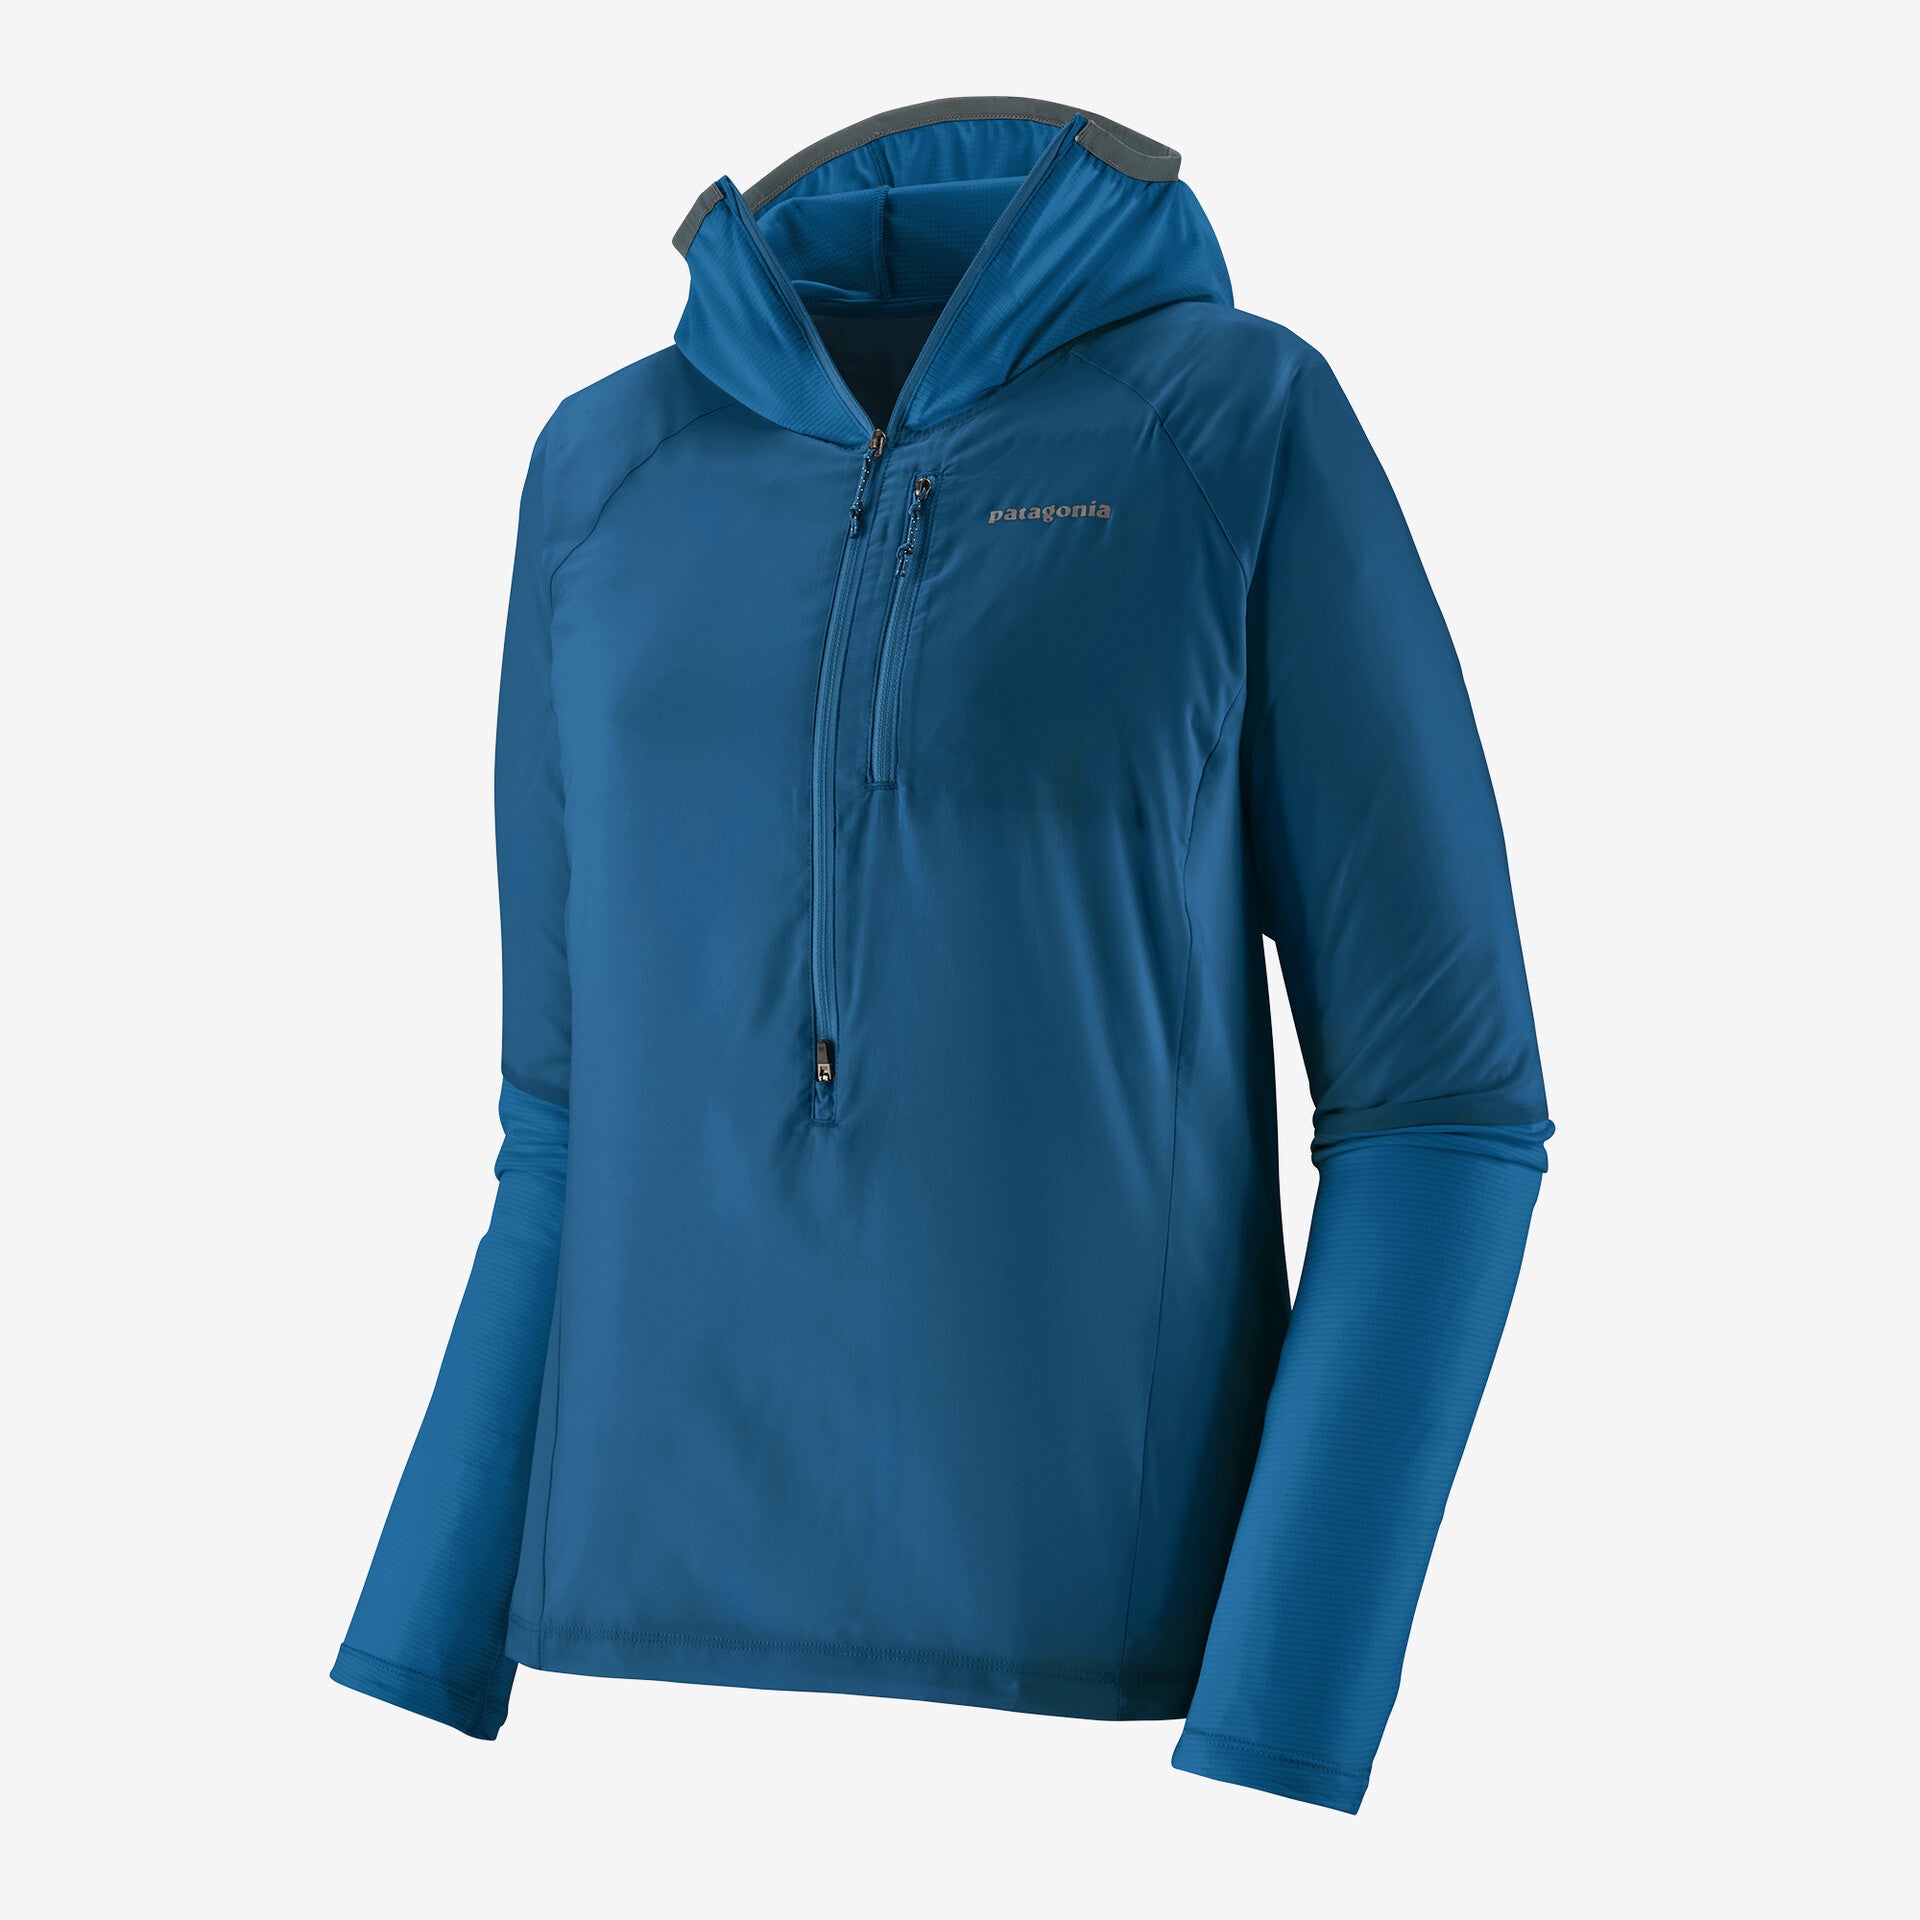 PATAGONIA WOMEN'S AIRSHED PRO PULLOVER - ENLB ENDLESS BLUE XS